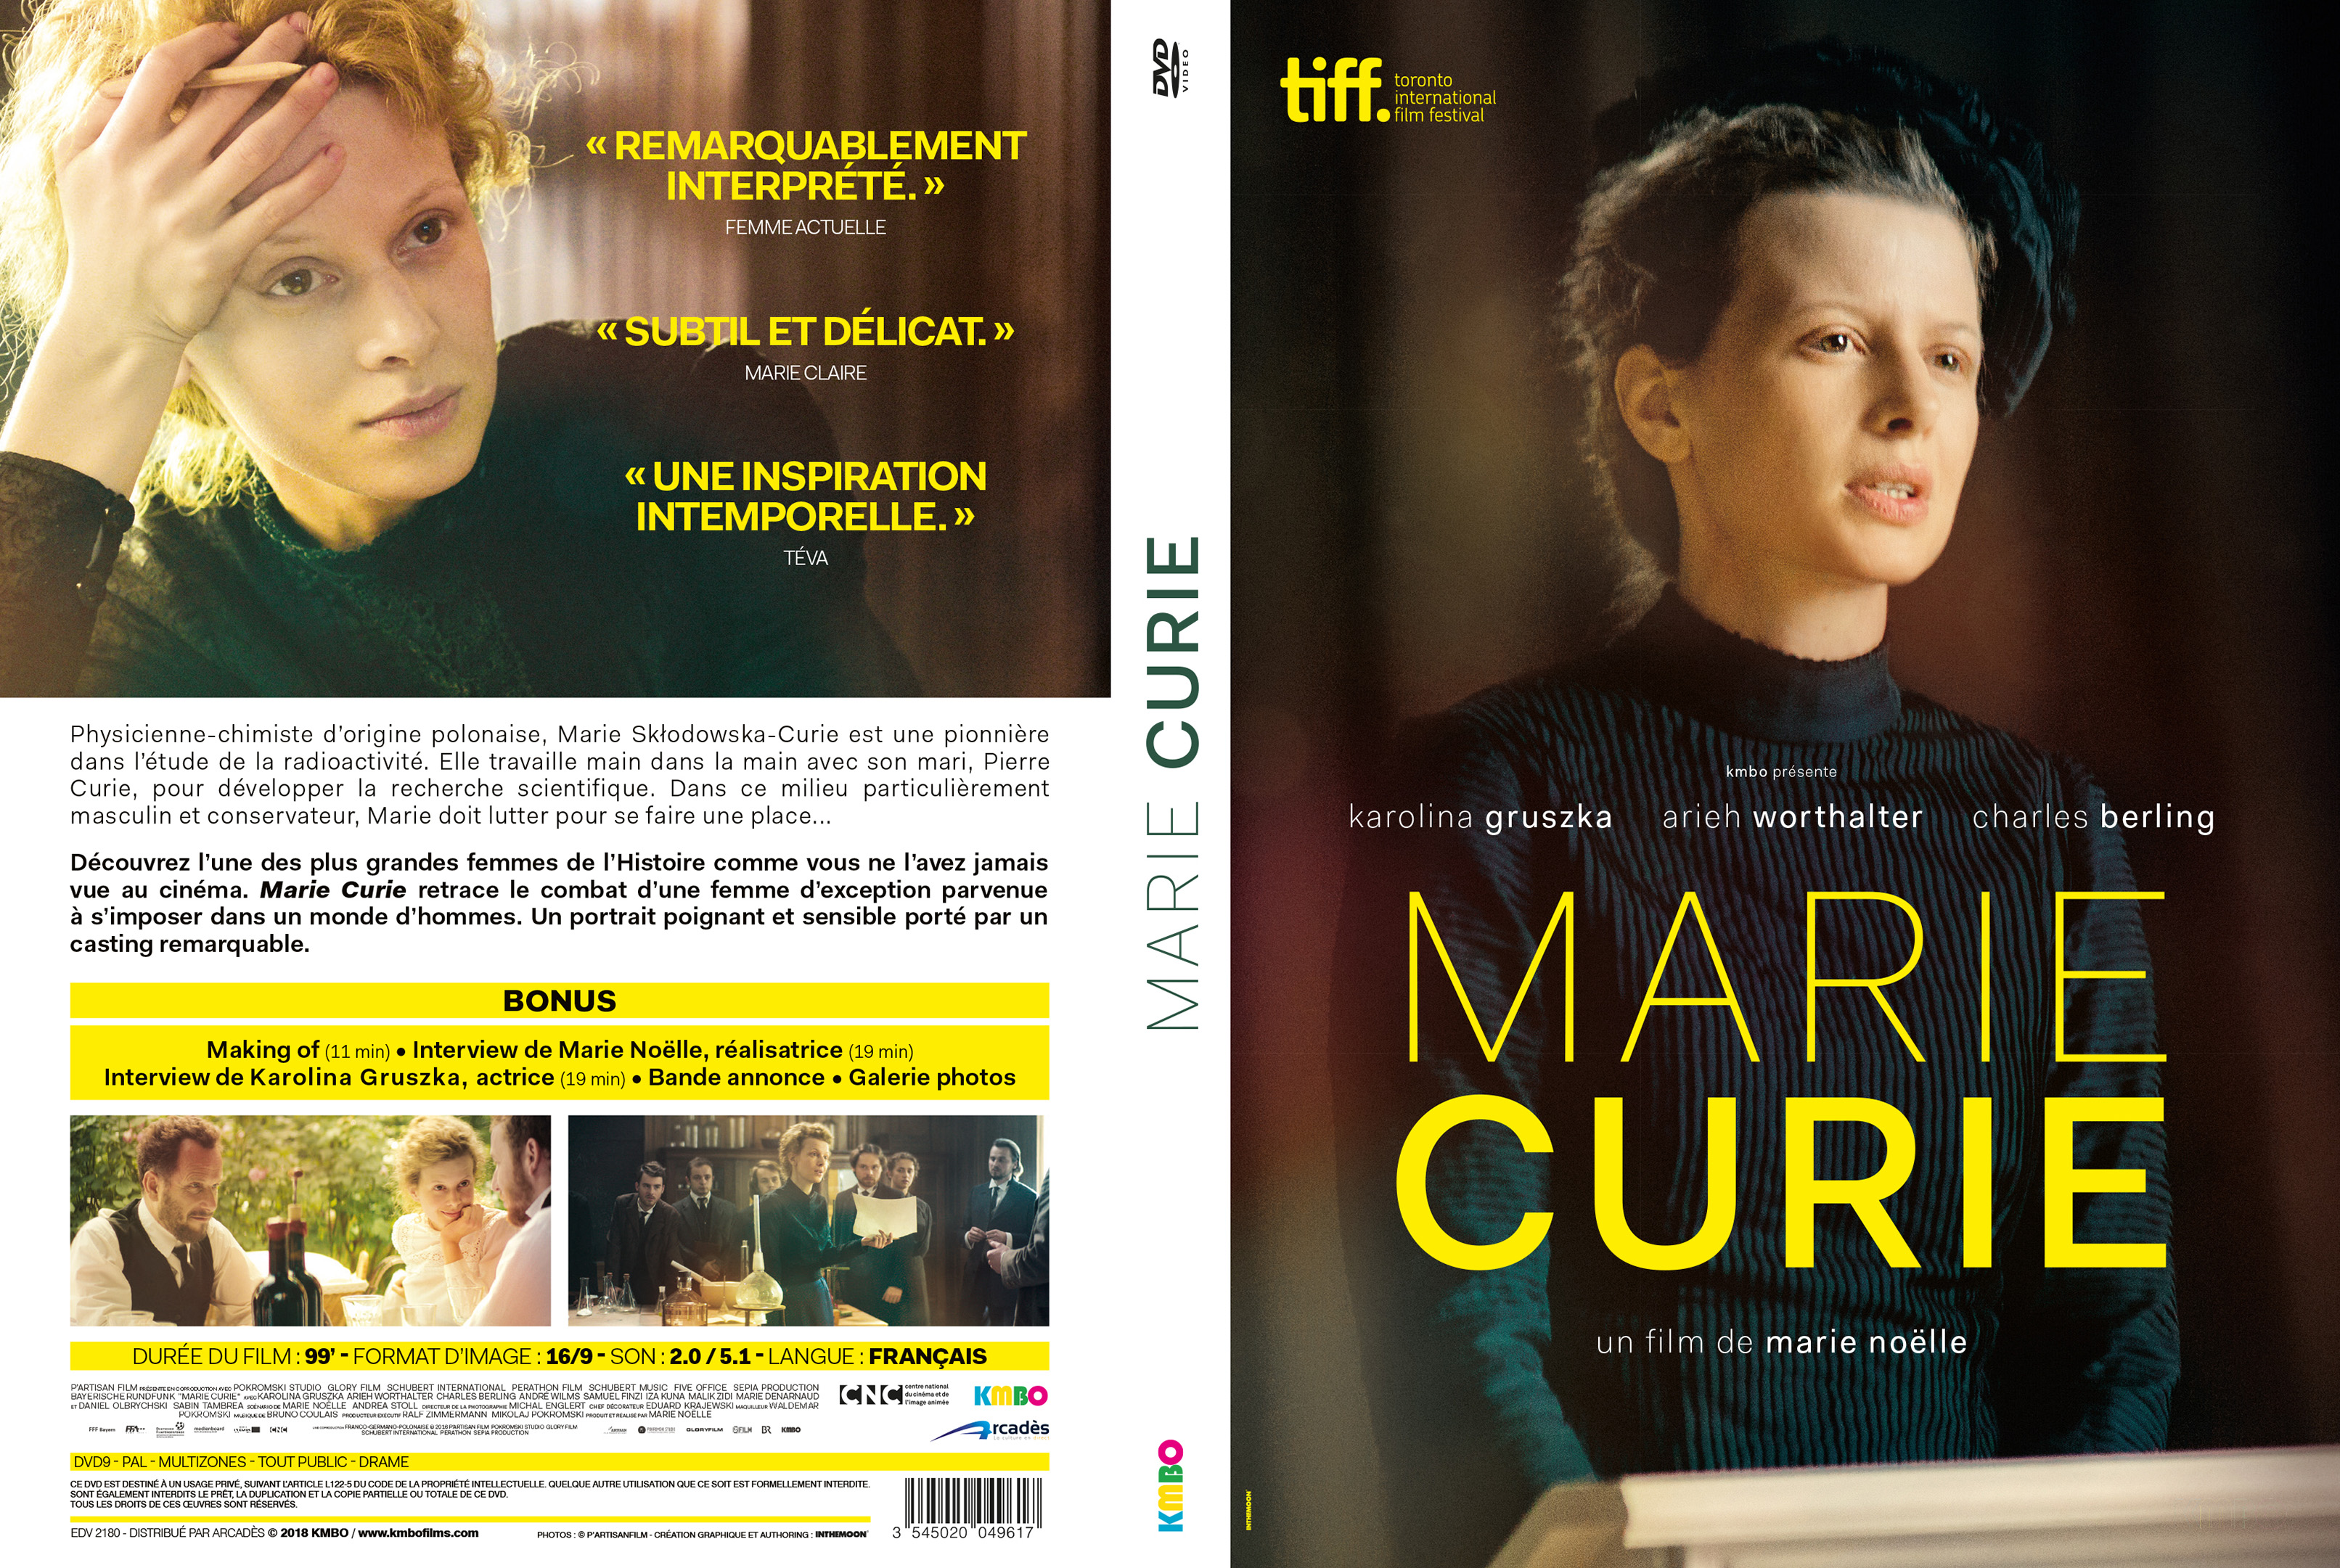 Jaquette DVD Marie Curie